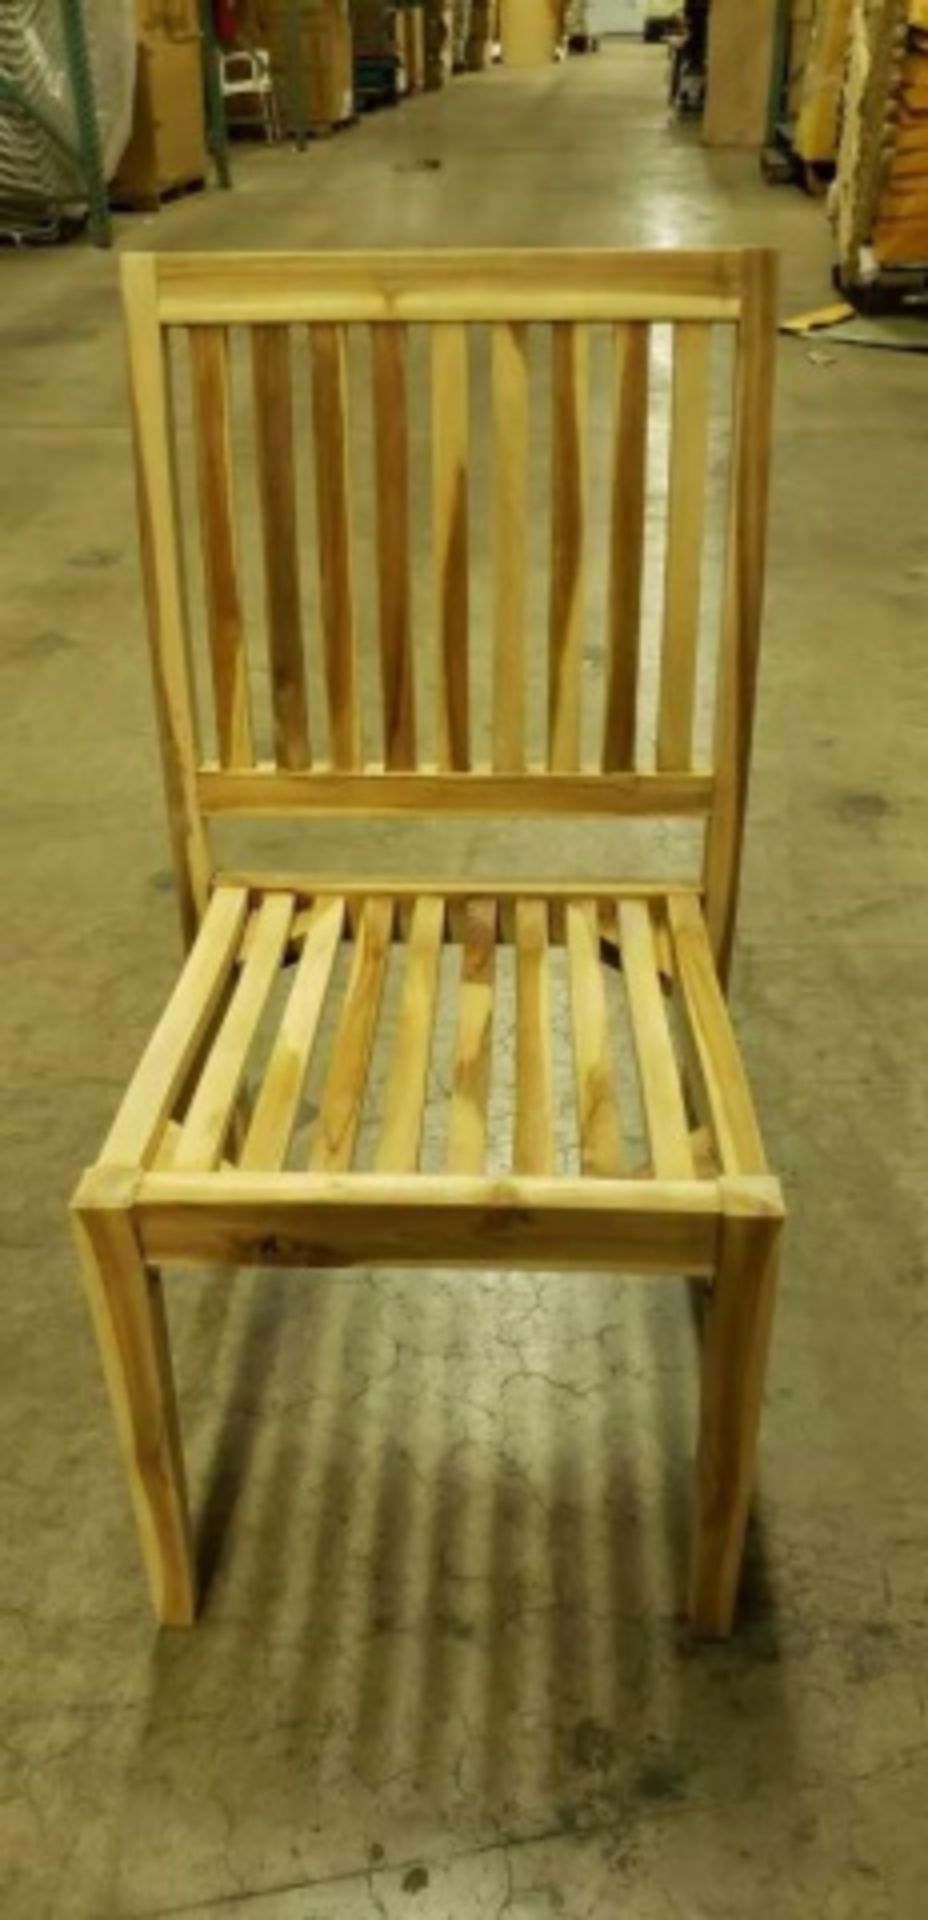 Genuine Teak Wood Reno Side Chair - Natural Wood. KT-RS. Dimensions:19.7"w x 21.6"d x 35.8"h, 17.3" - Image 3 of 6